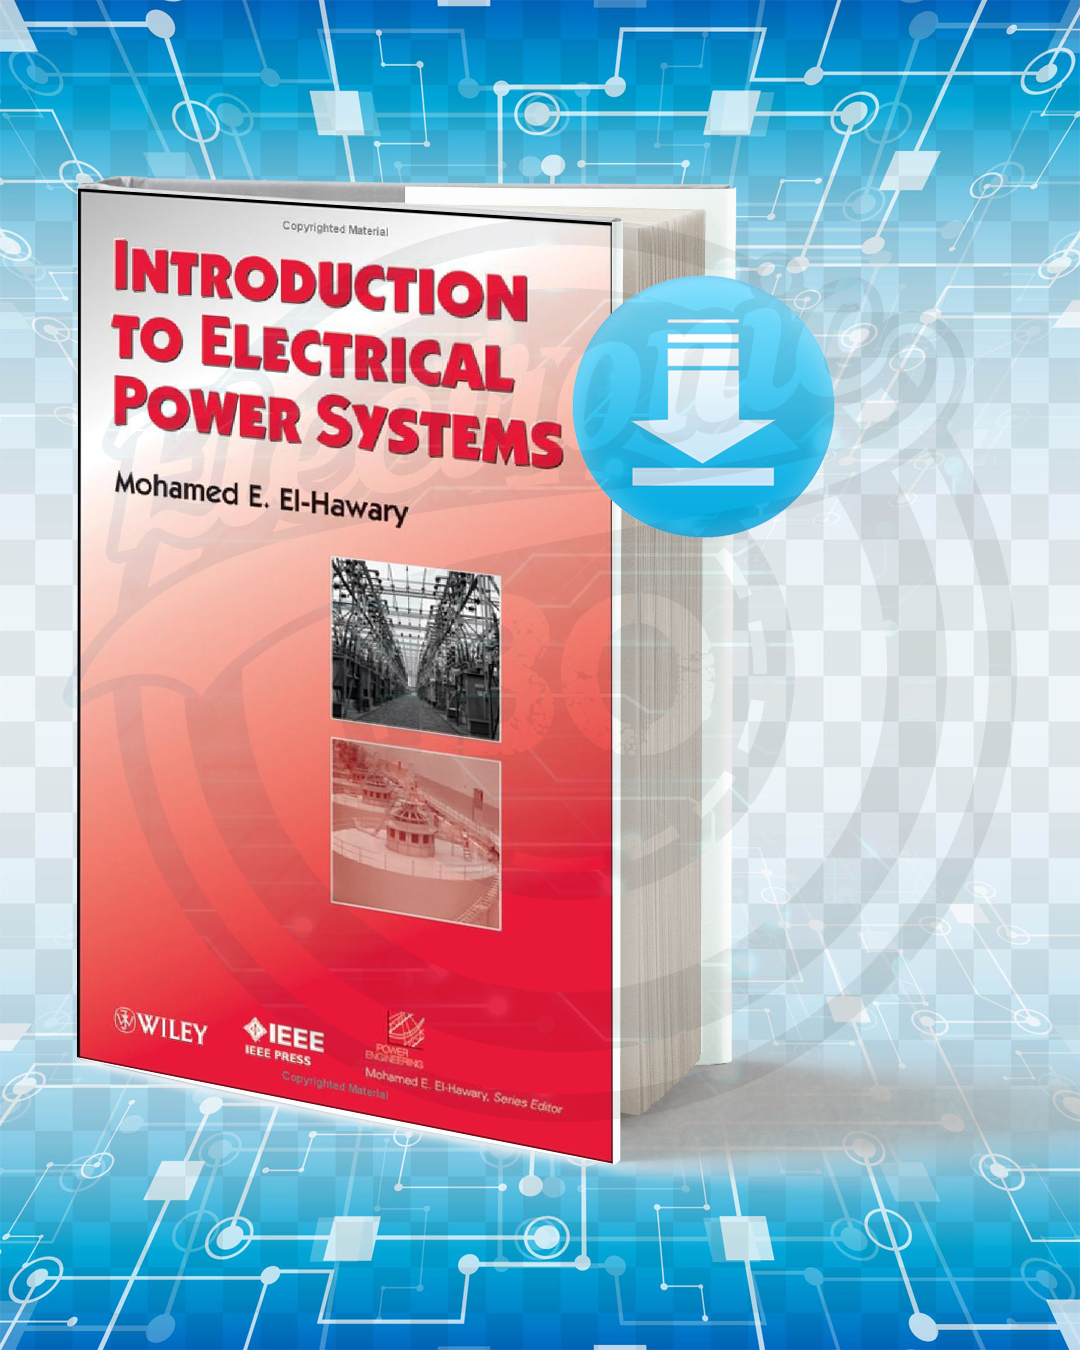 Download Introduction to Electrical Power Systems pdf.